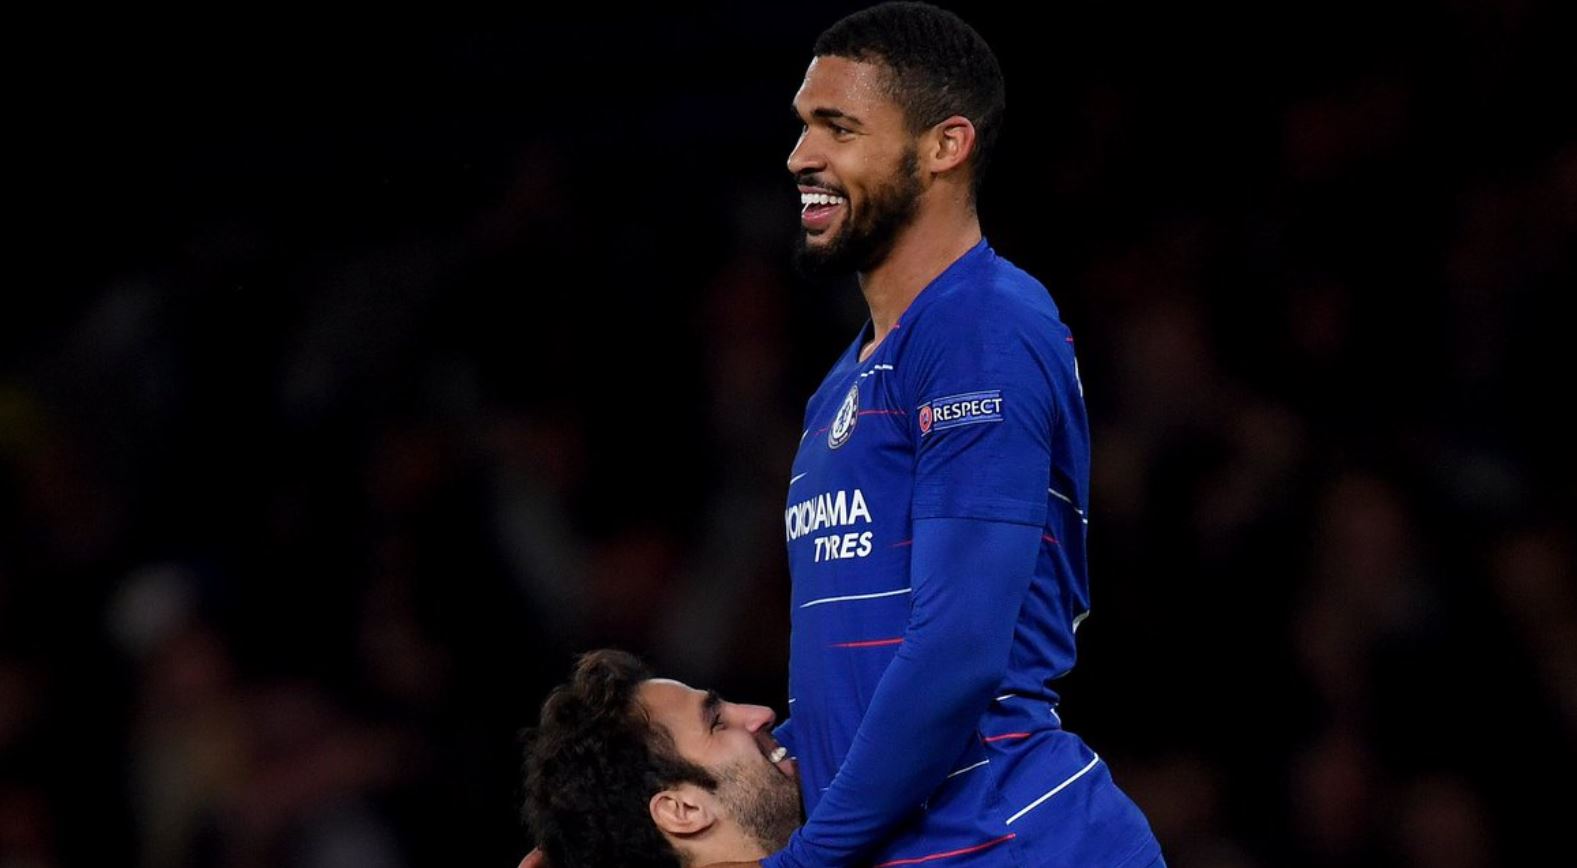 Loftus-Cheek has struggled with injuries during his time at Chelsea.